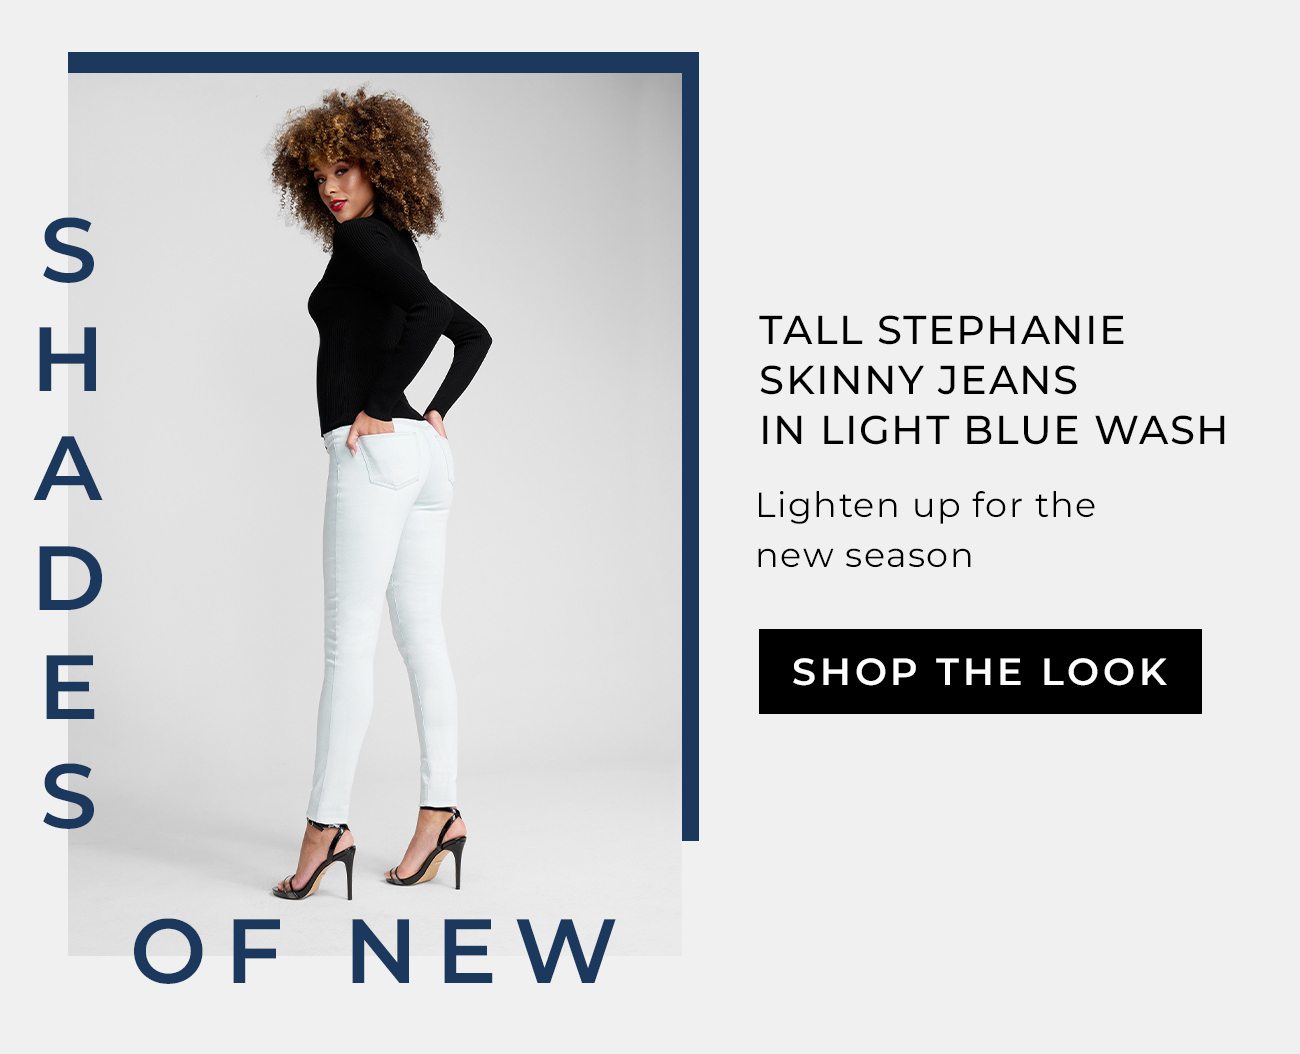 Lighten up for the new season - Tall Stephanie Skinny Jeans in Light Blue Wash